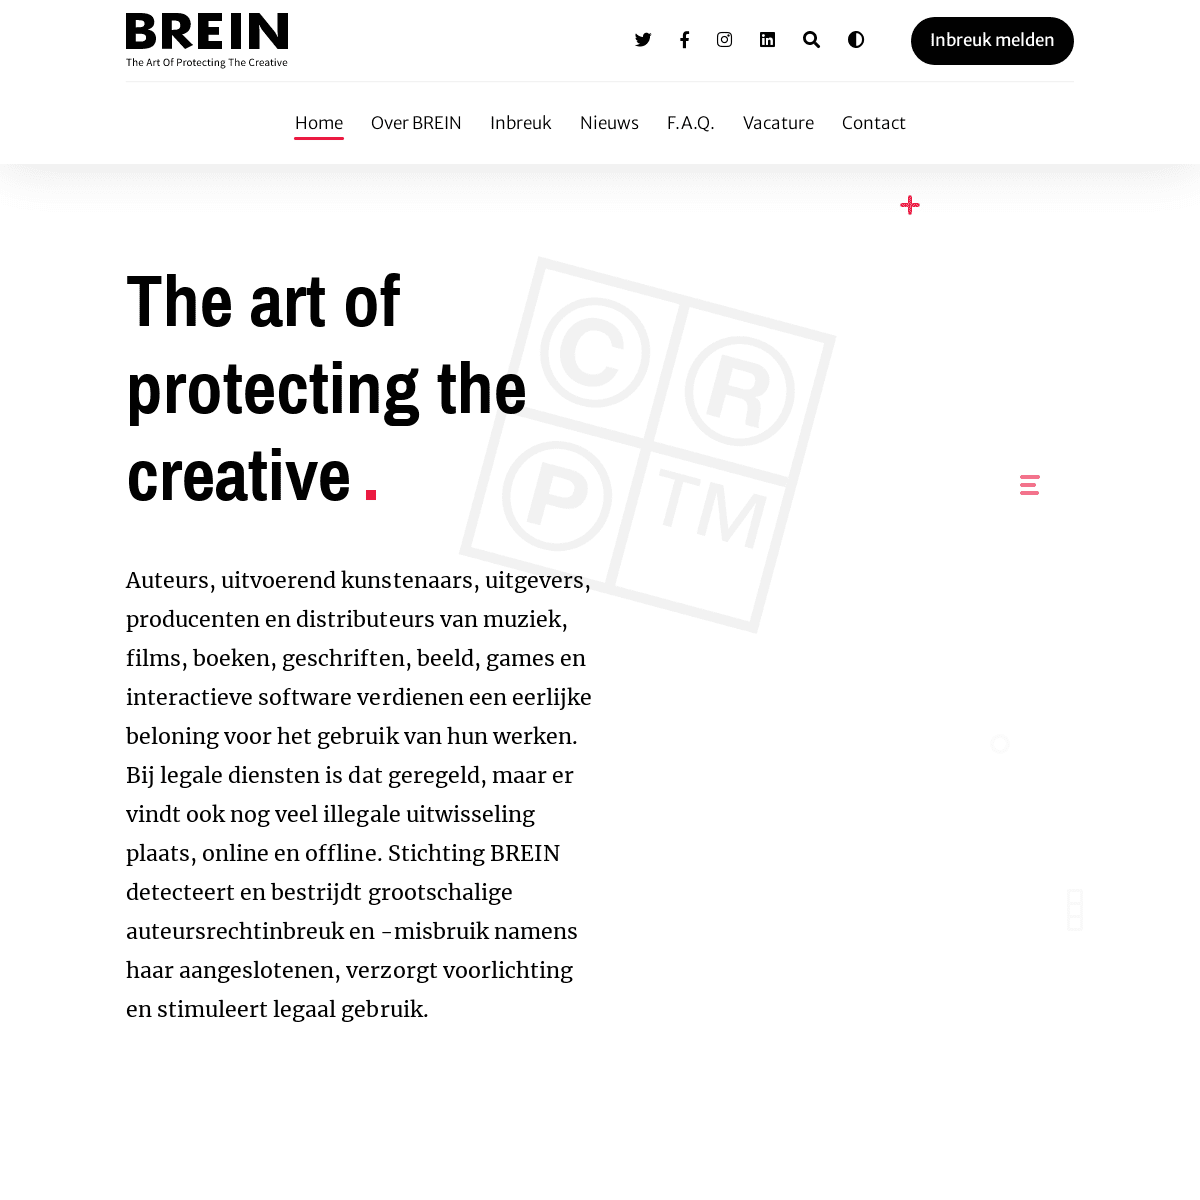 A complete backup of https://stichtingbrein.nl